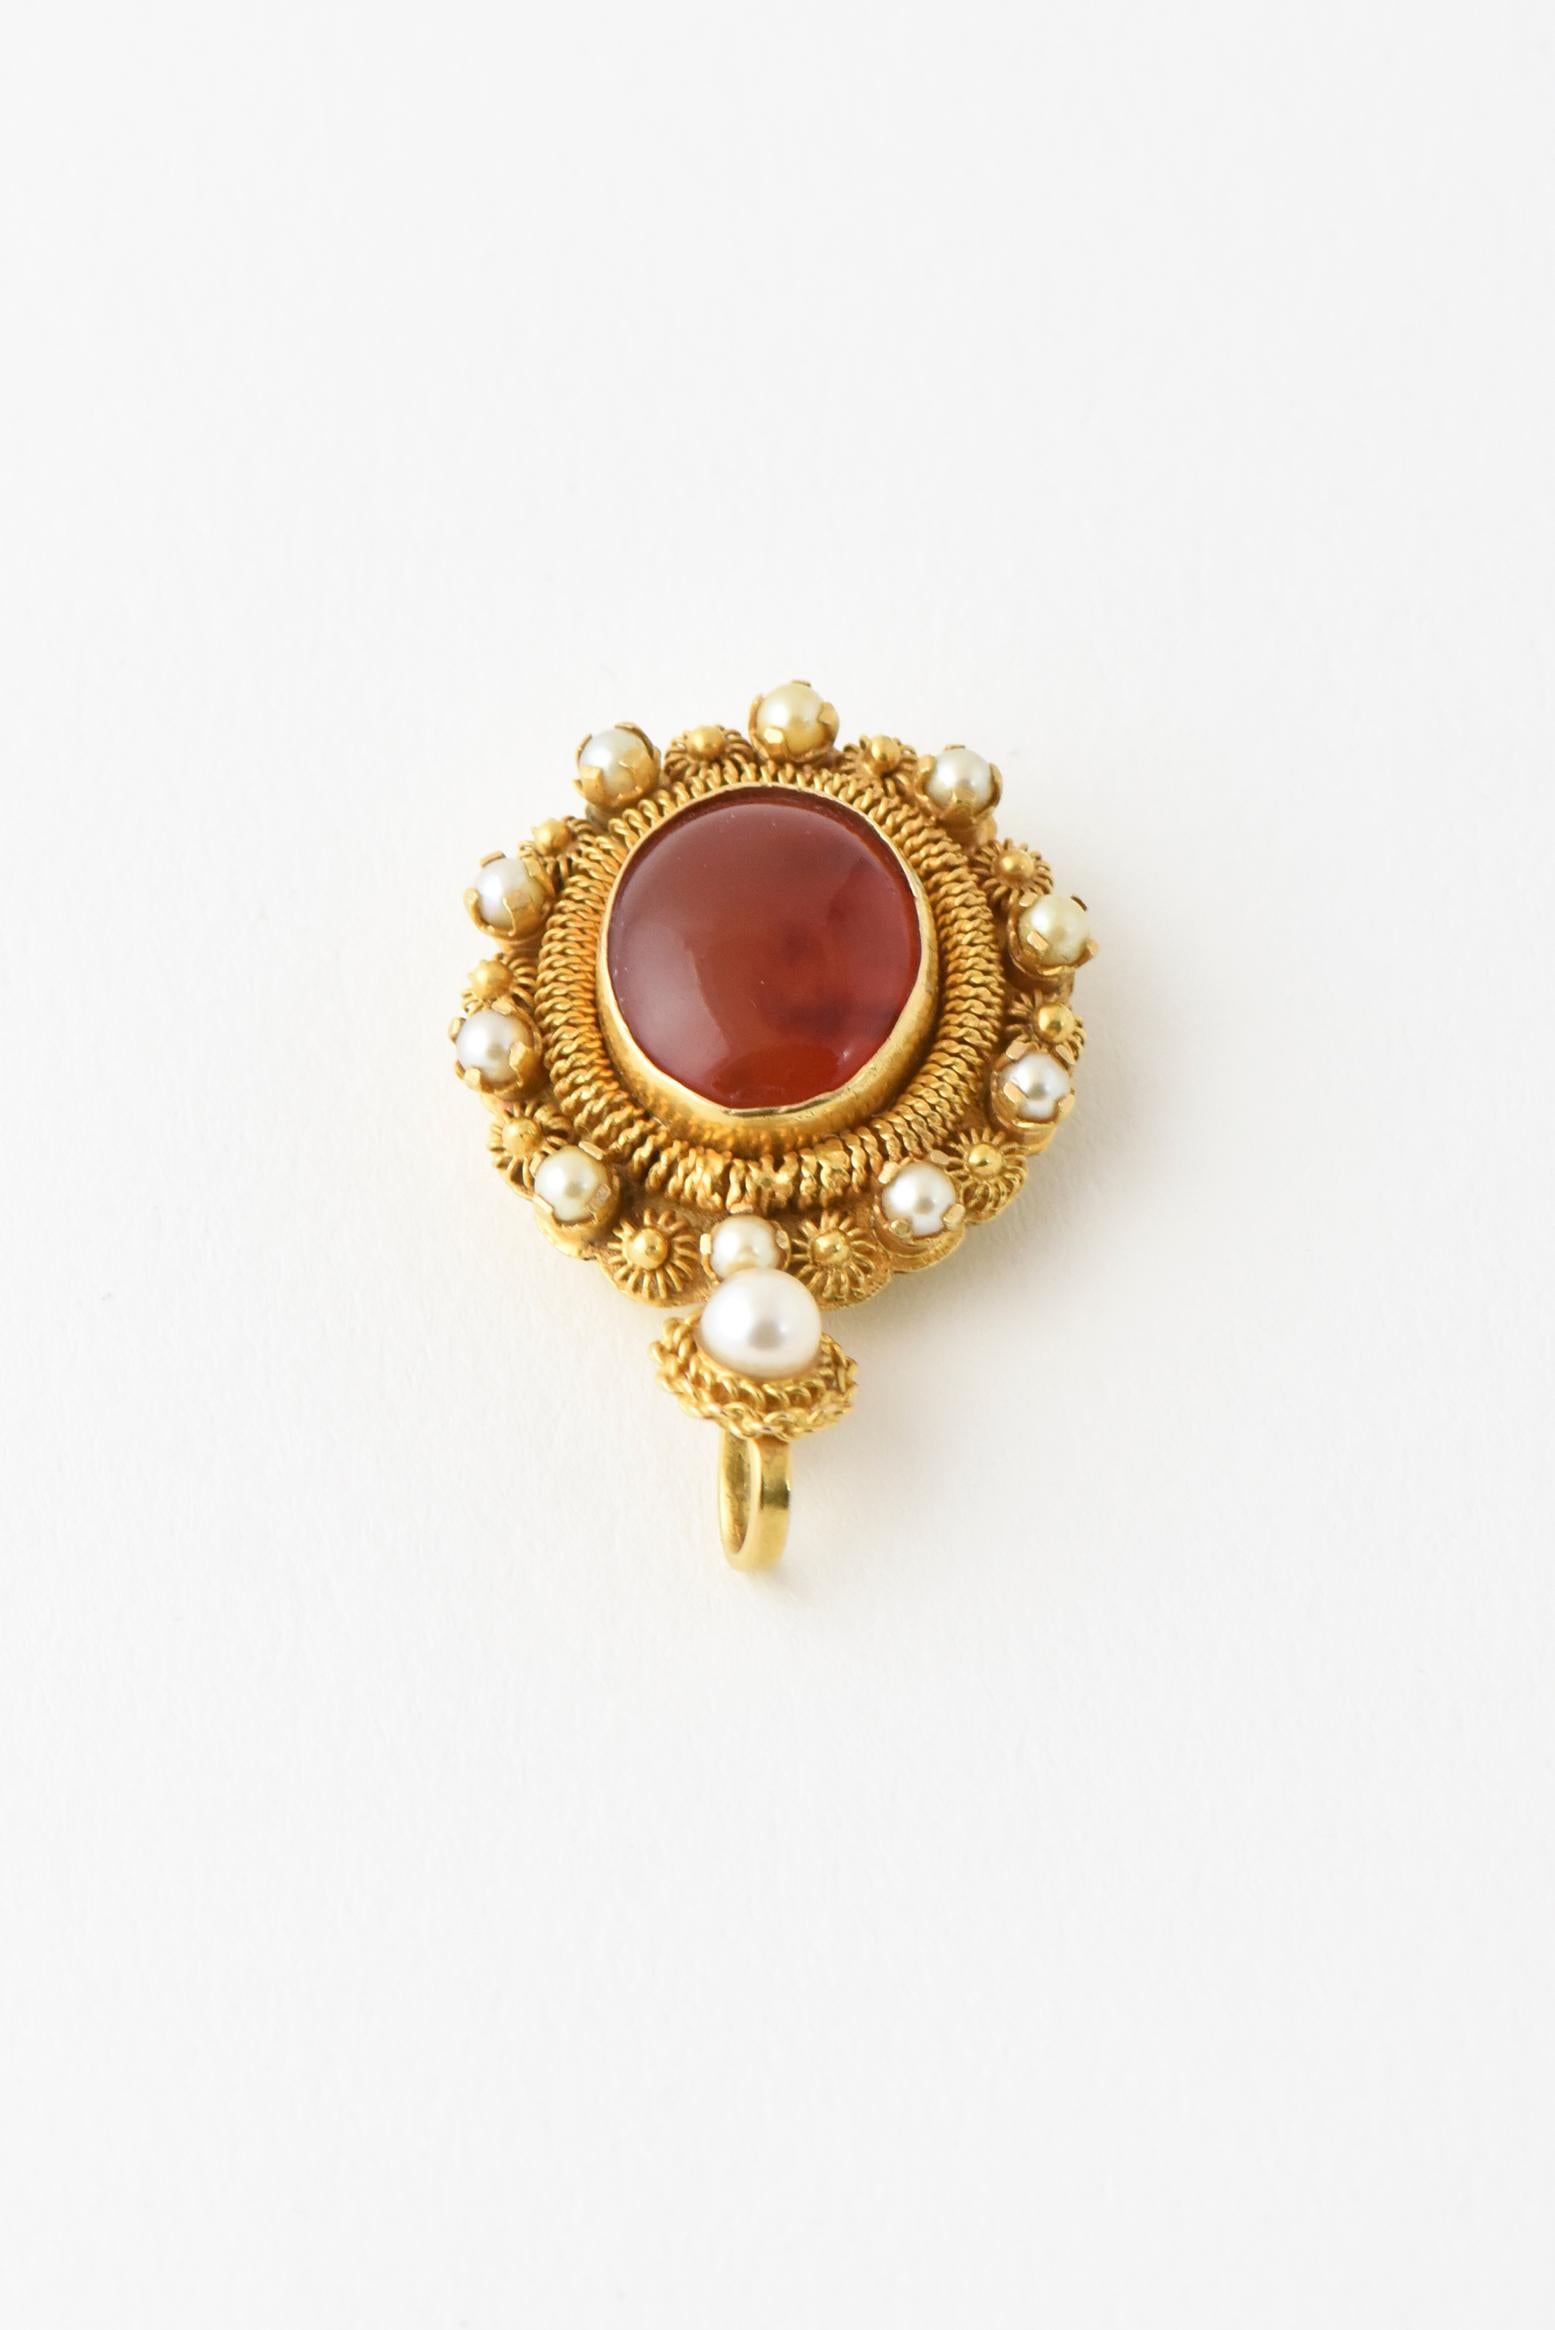 Women's or Men's Victorian Revival Carnelian and Pearl Gold Pendant Charm